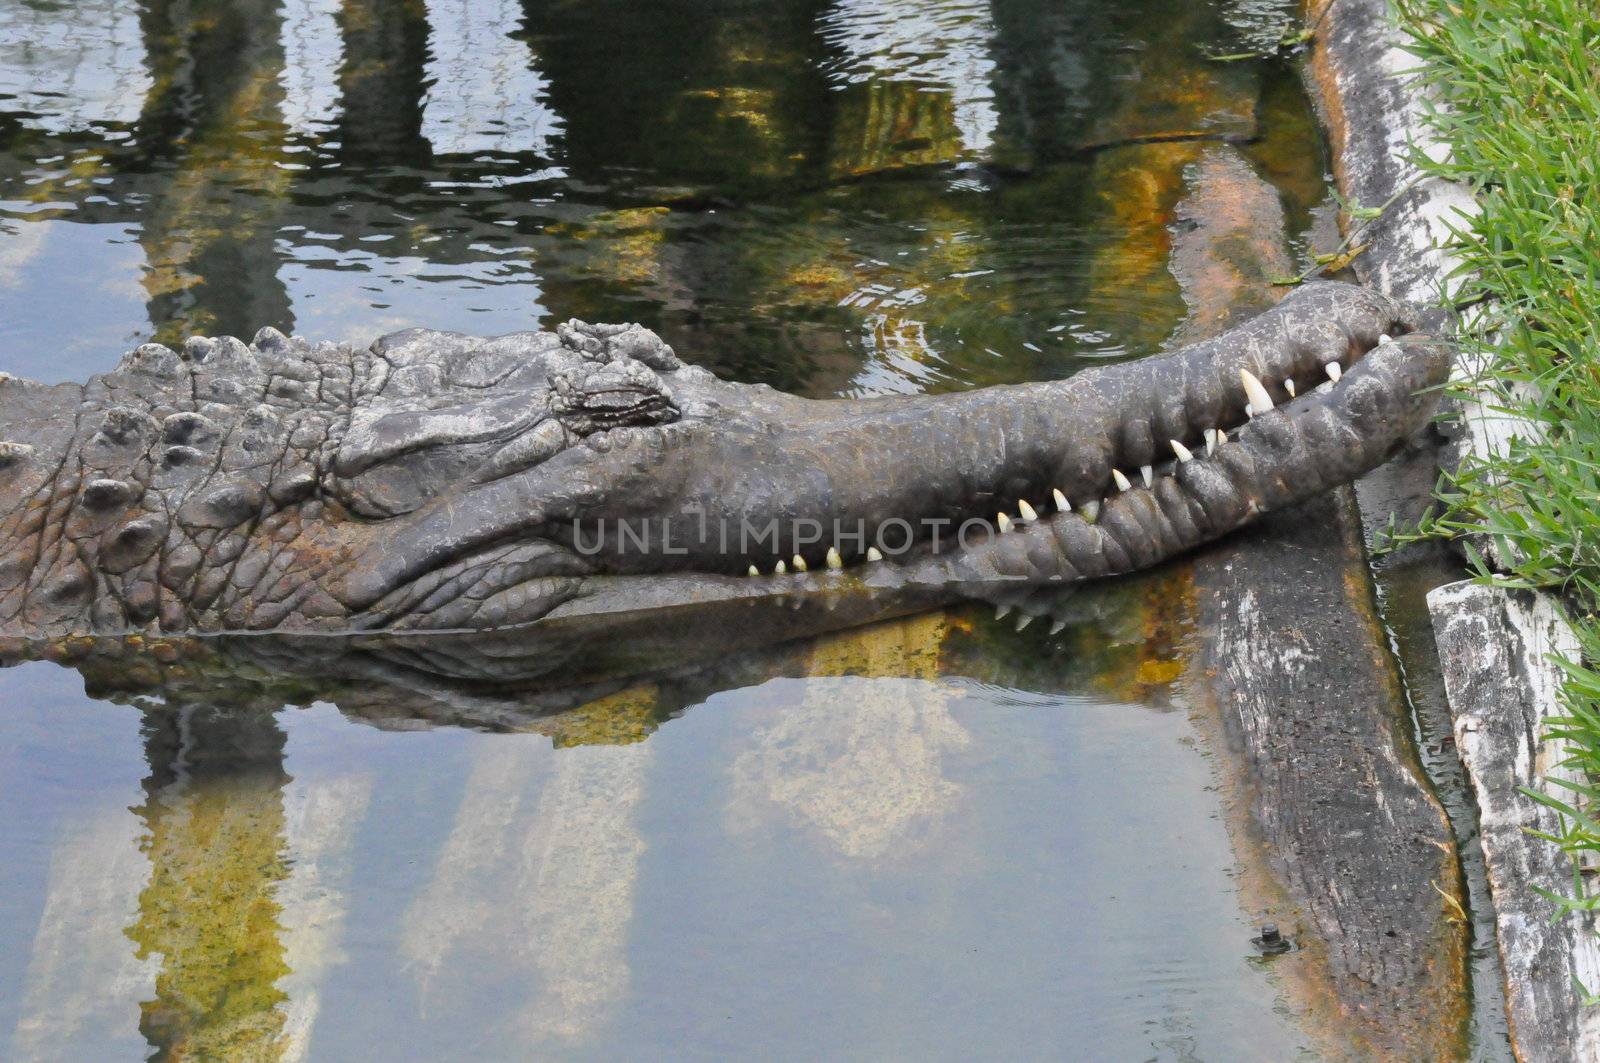 Crocodile snoozes on the bank by RefocusPhoto